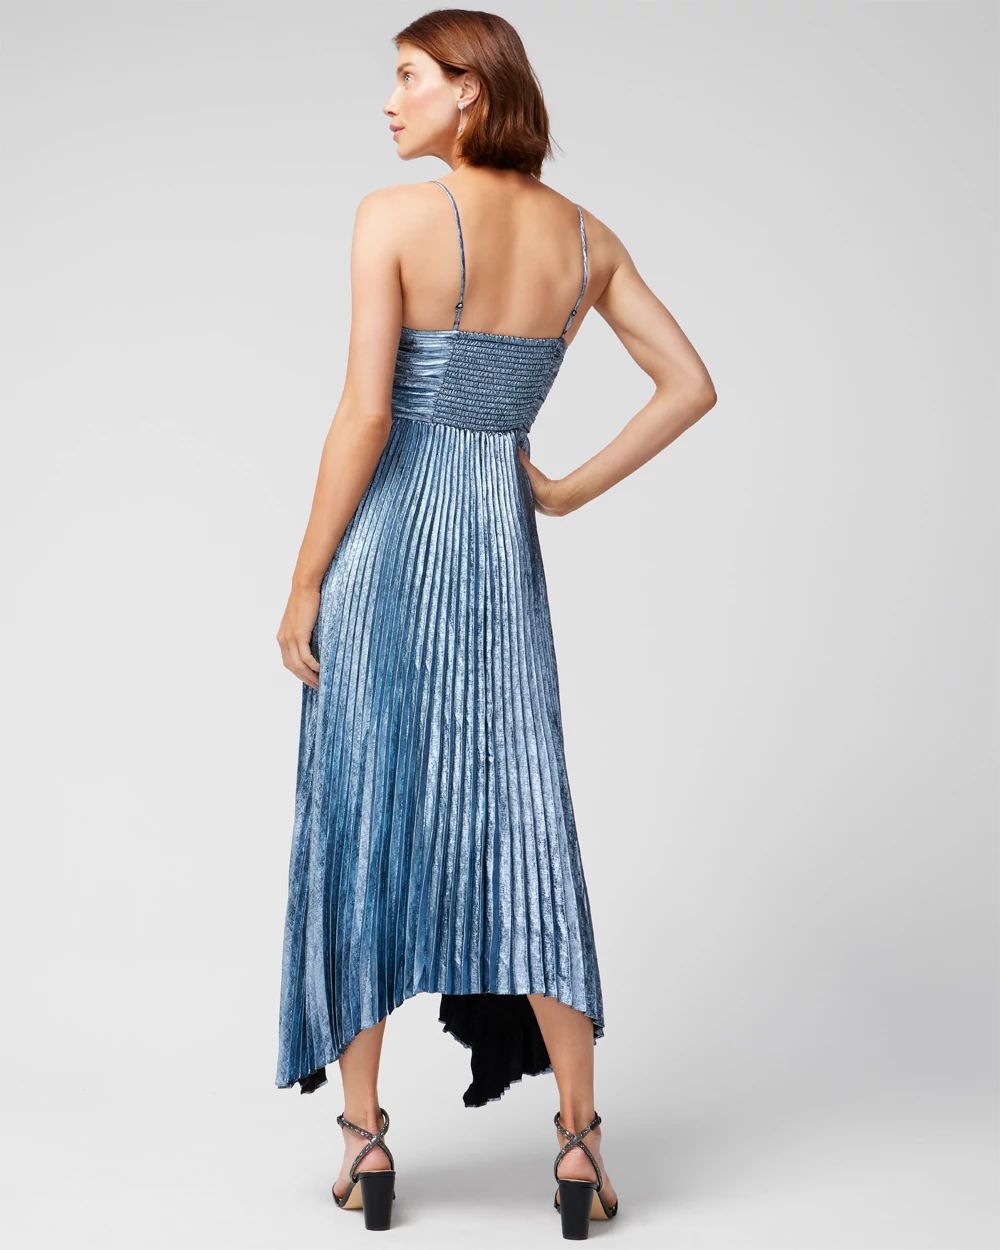 Pleated Metallic Midi Dress click to view larger image.